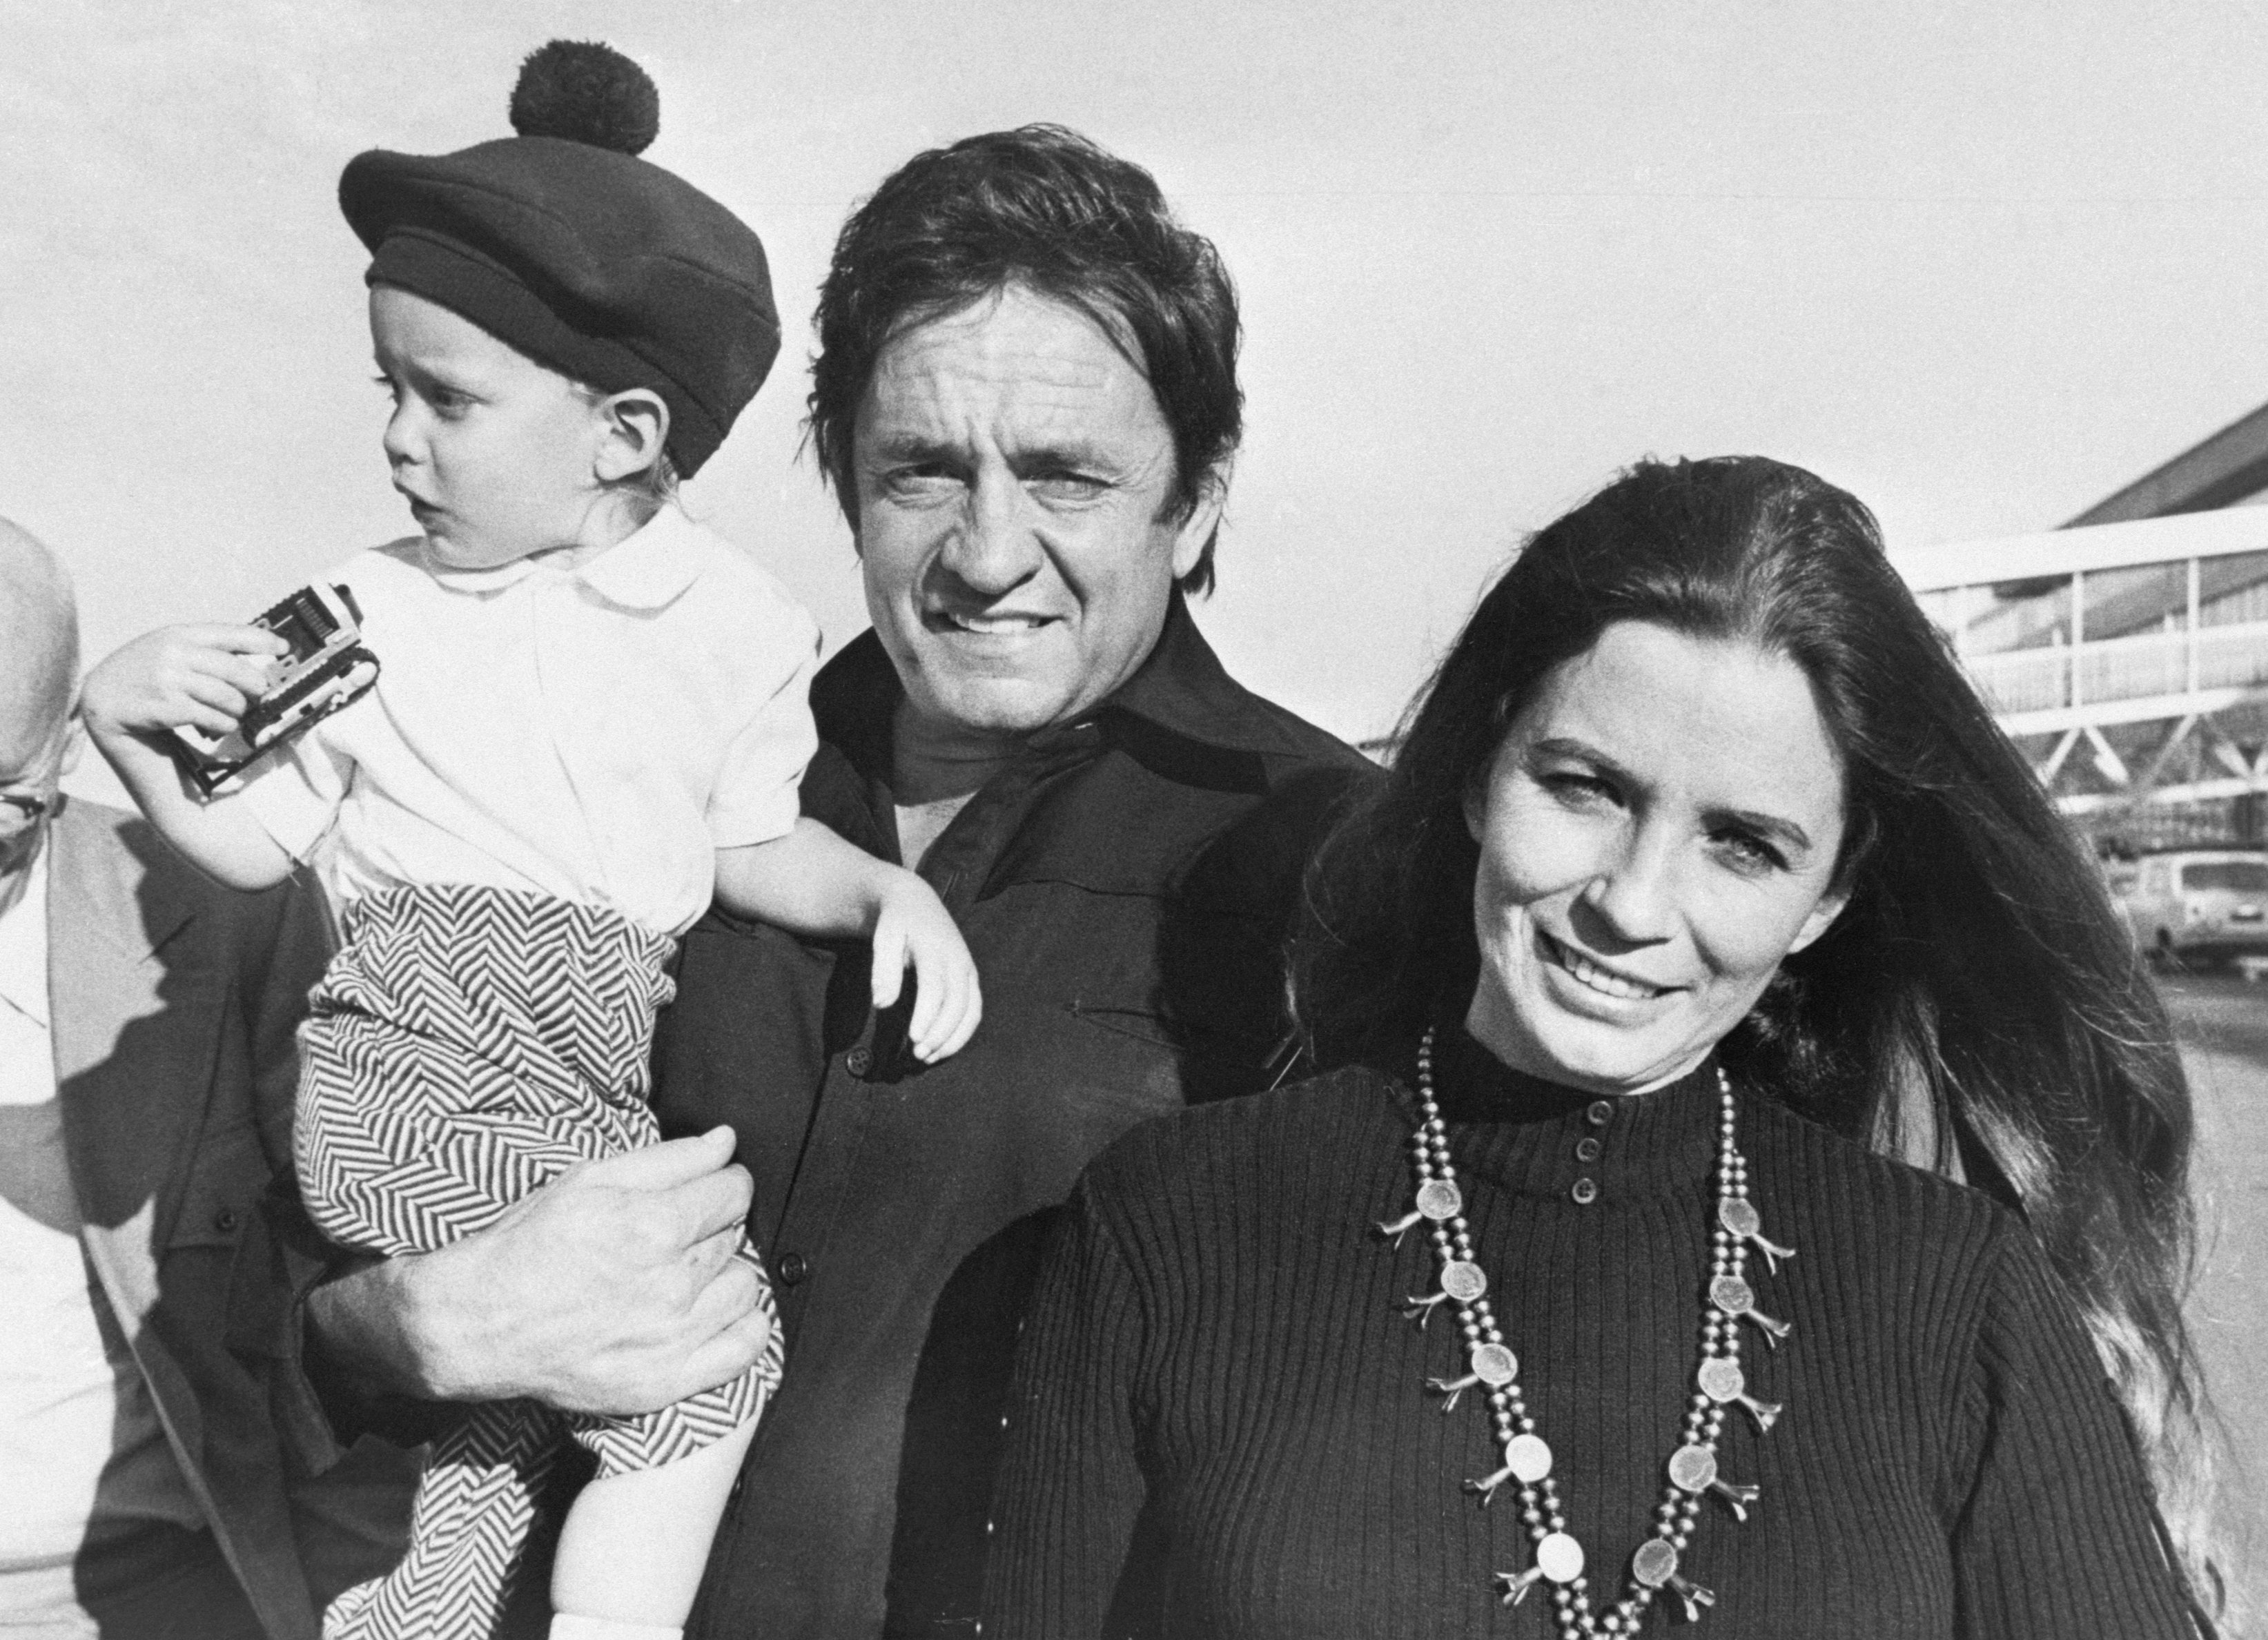 Johnny Cash, his wife June Carter and their son John arrive for the filming of "Following the Footsteps of Jesus." | Photo: Getty Images